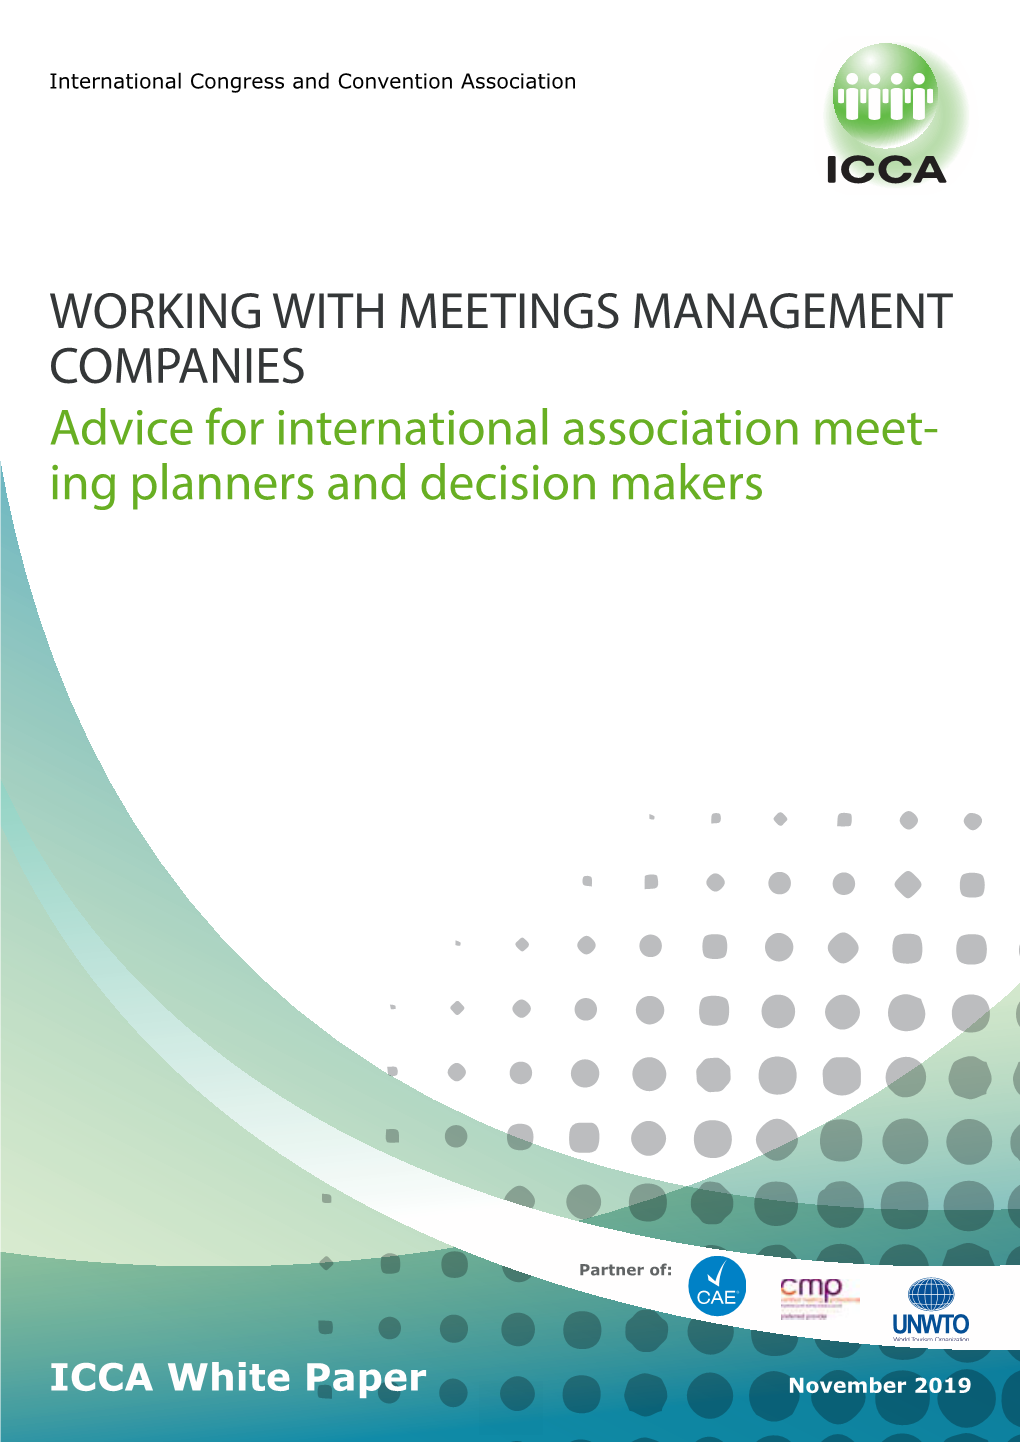 WORKING with MEETINGS MANAGEMENT COMPANIES Advice for International Association Meet- Ing Planners and Decision Makers